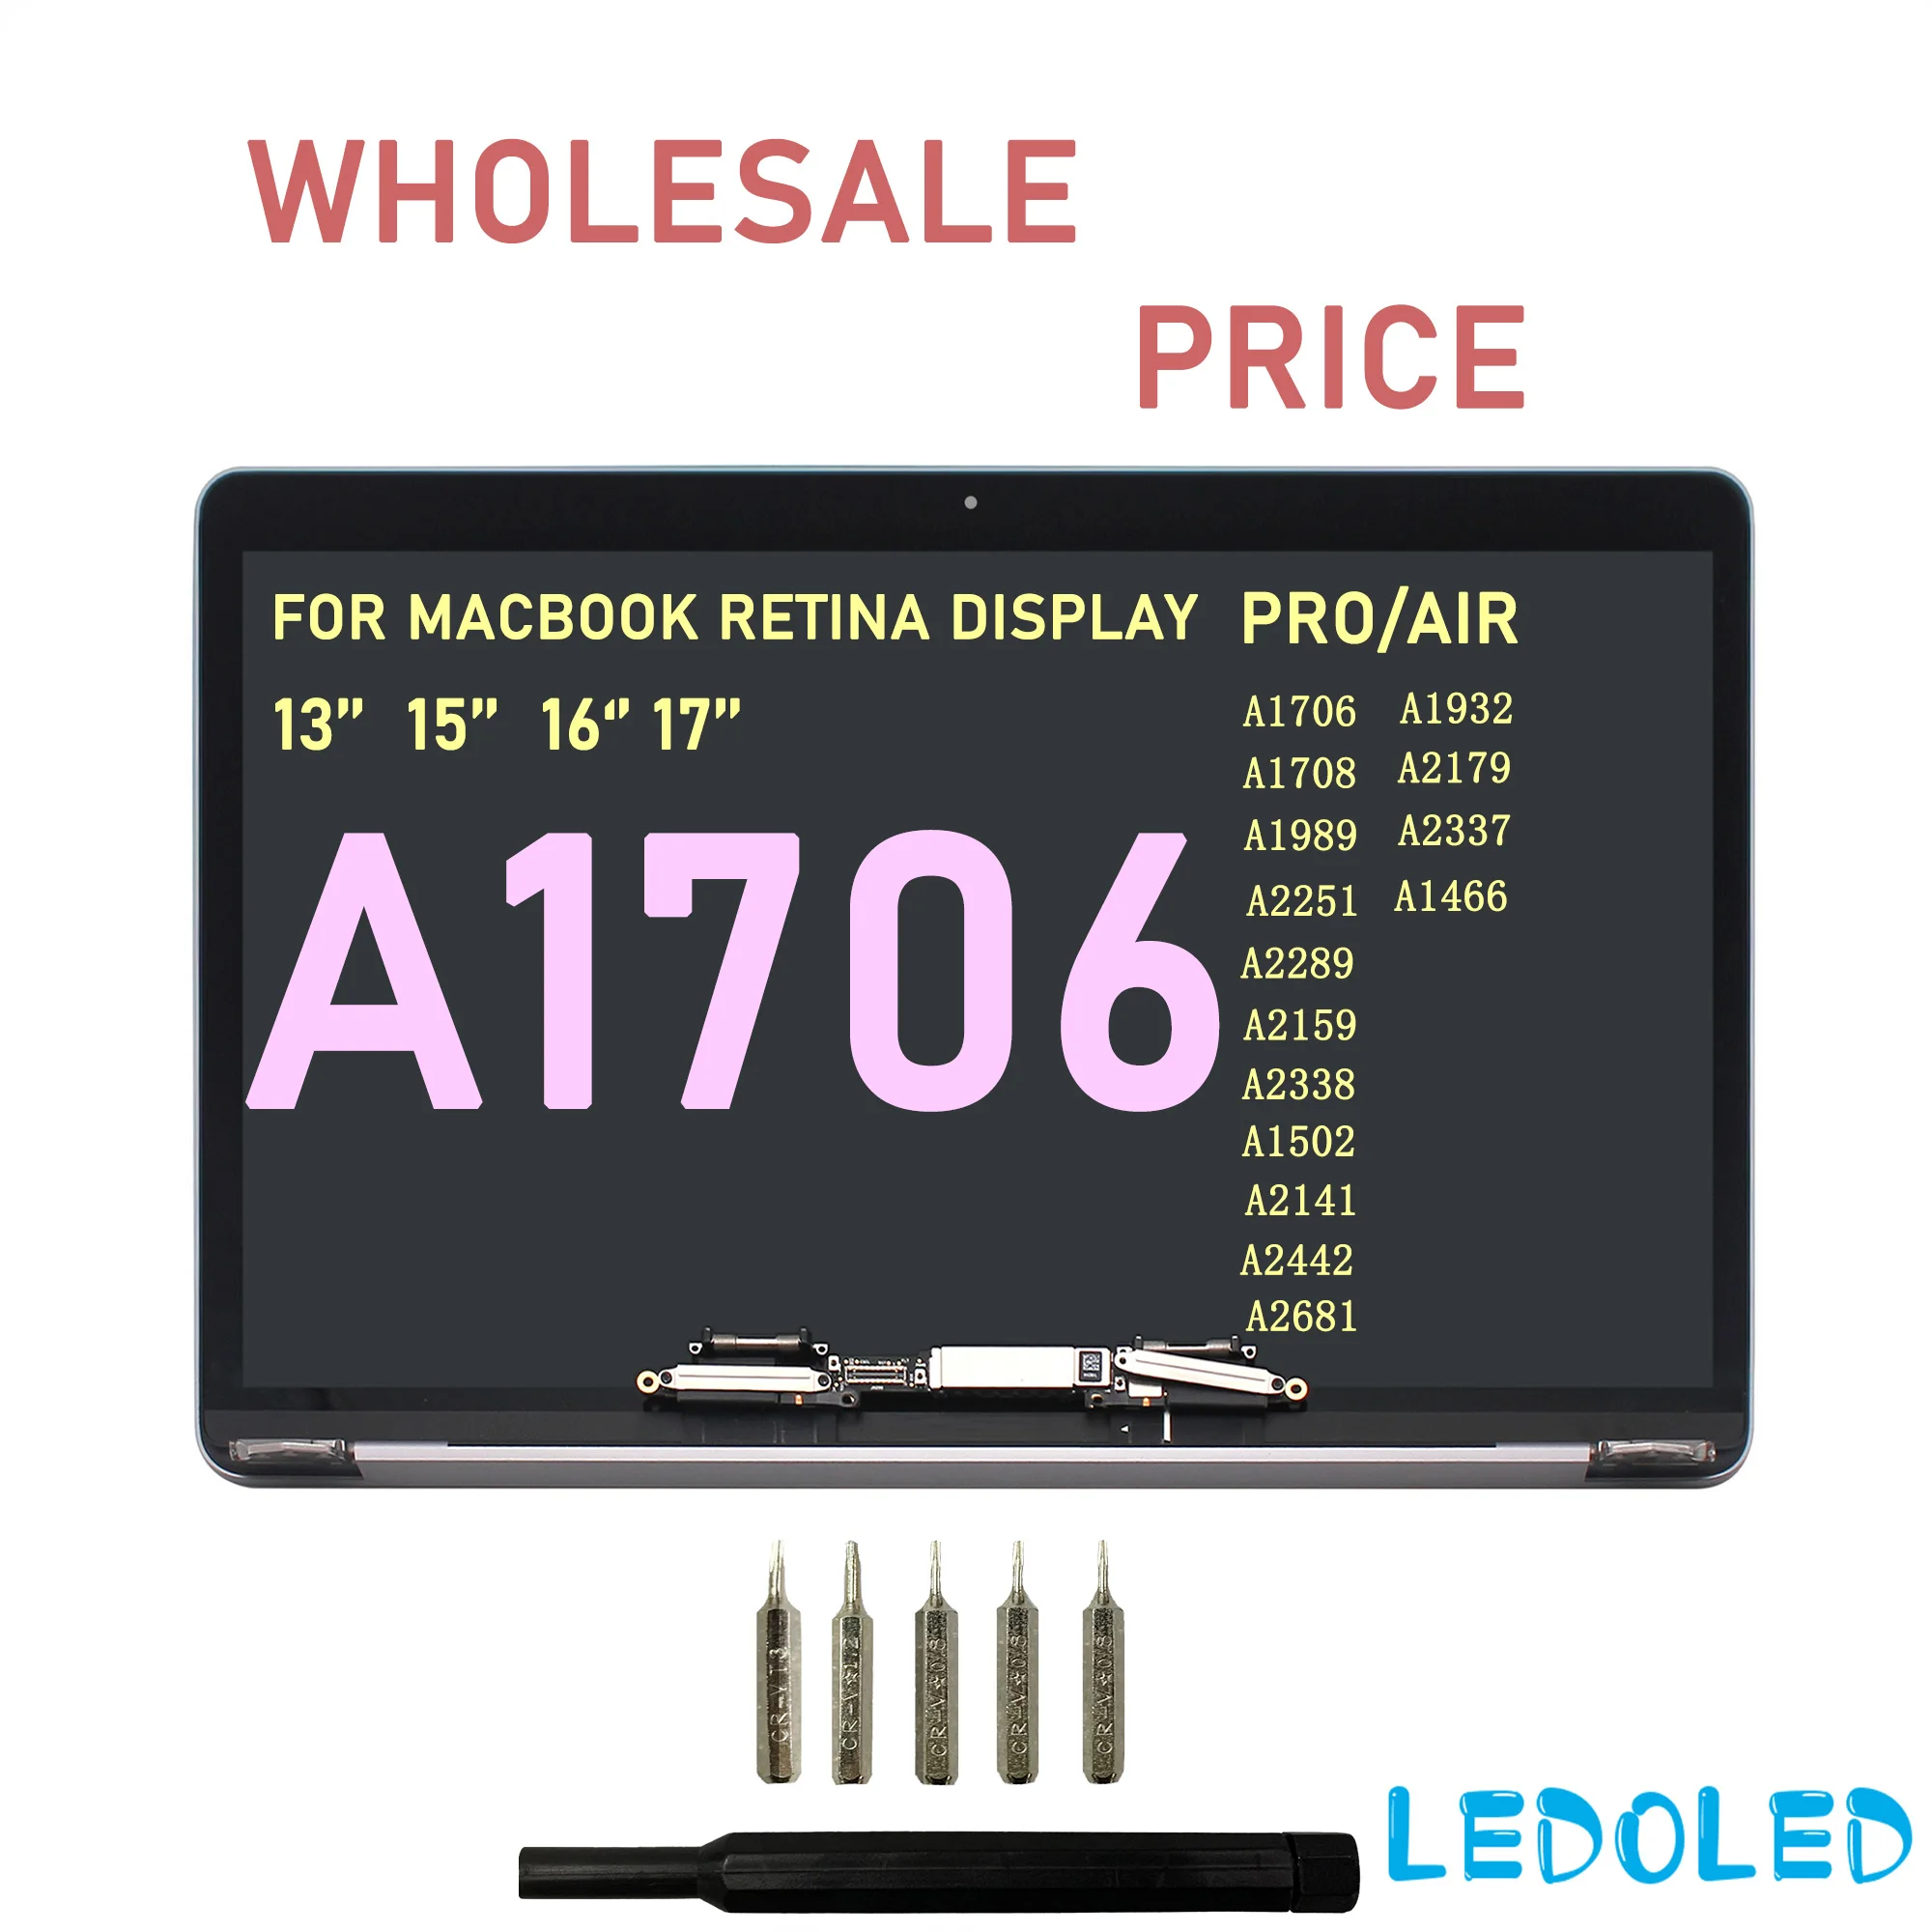 

New A1706 A1708 A1932 A2179 A2337 A2338 A1502 A1989 A2159 A2289 A2251 for Macbook Retina 13" Laptop LCD Screen Display Assembly